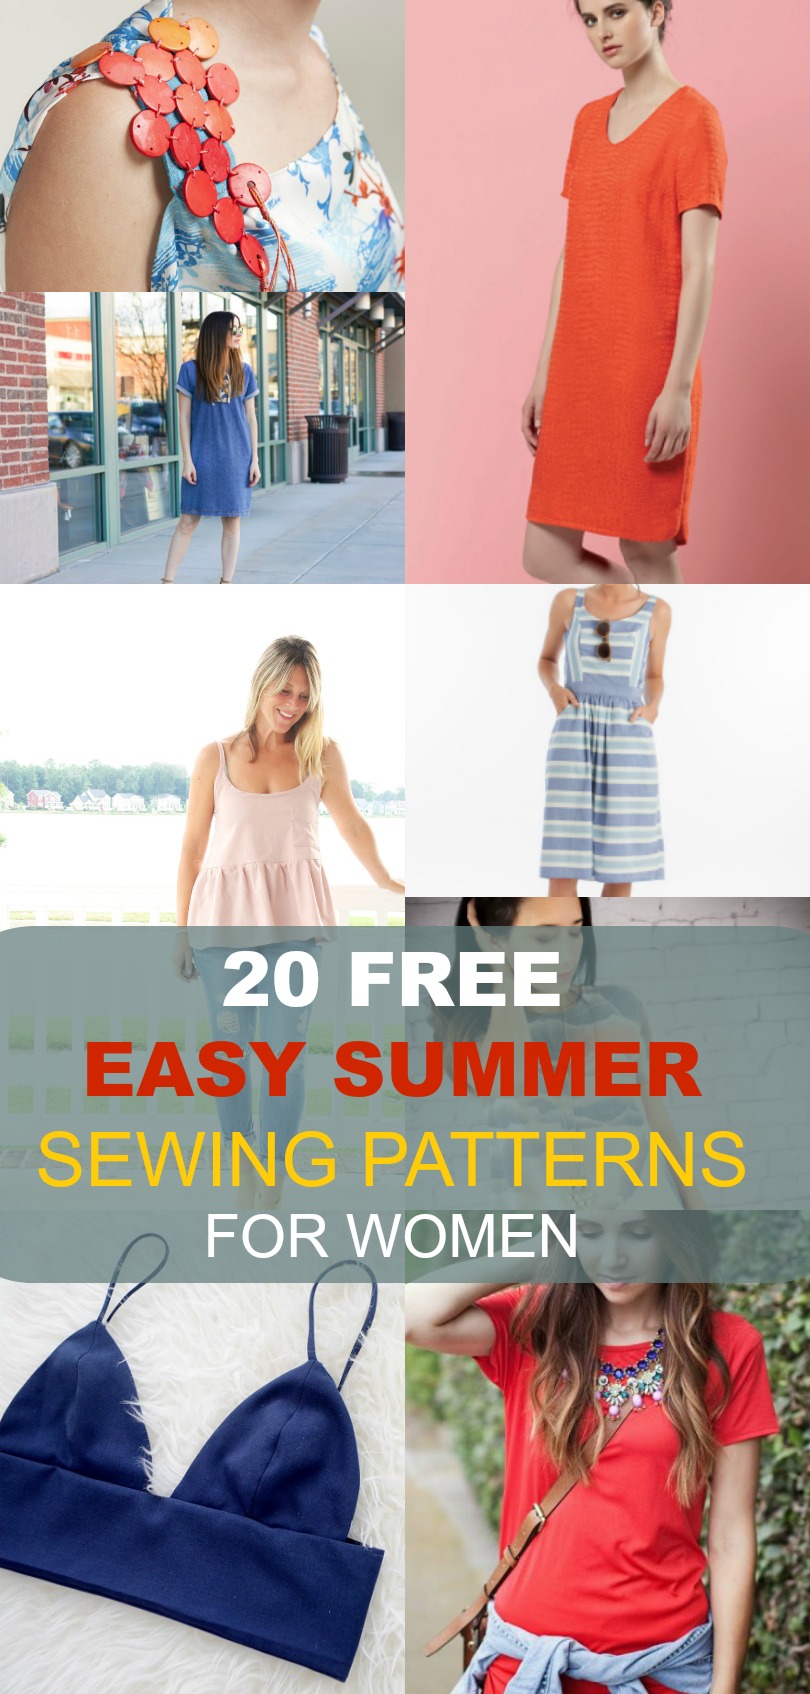 FREE SEWING PATTERNS: 20 Easy Summer Patterns for Women